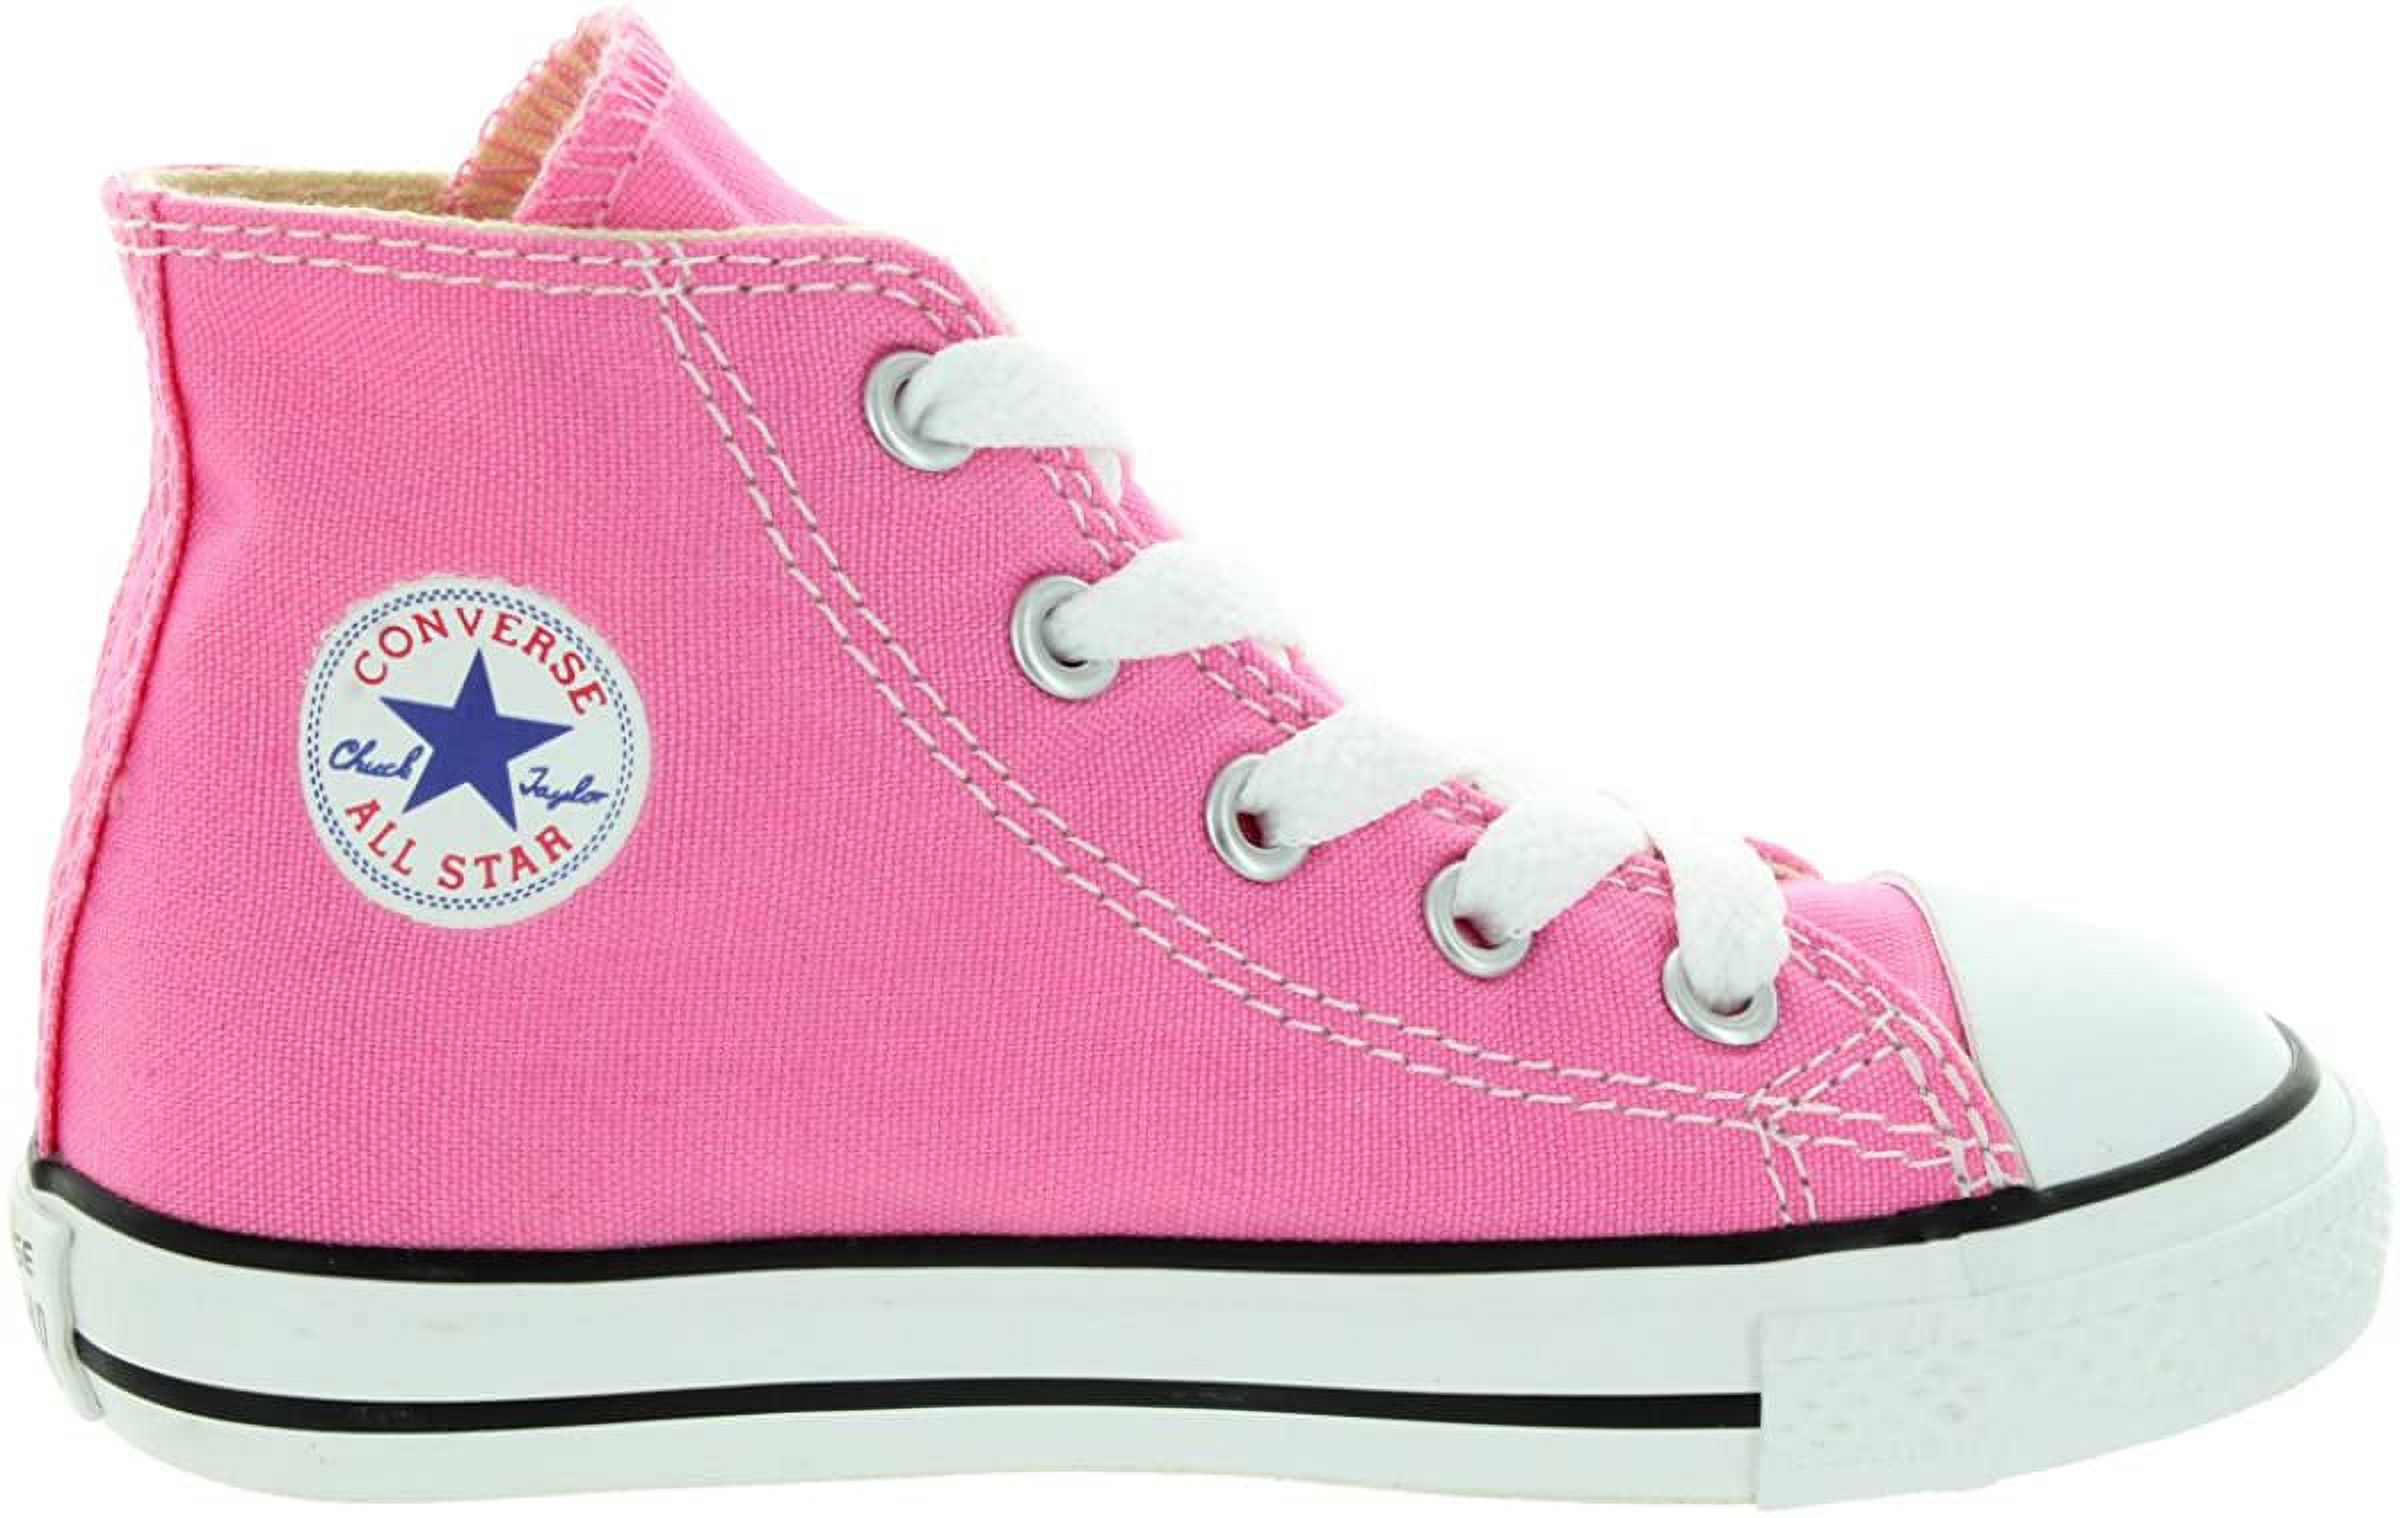 Infant Converse Chuck Taylor All Star High Top Sneaker - image 5 of 5